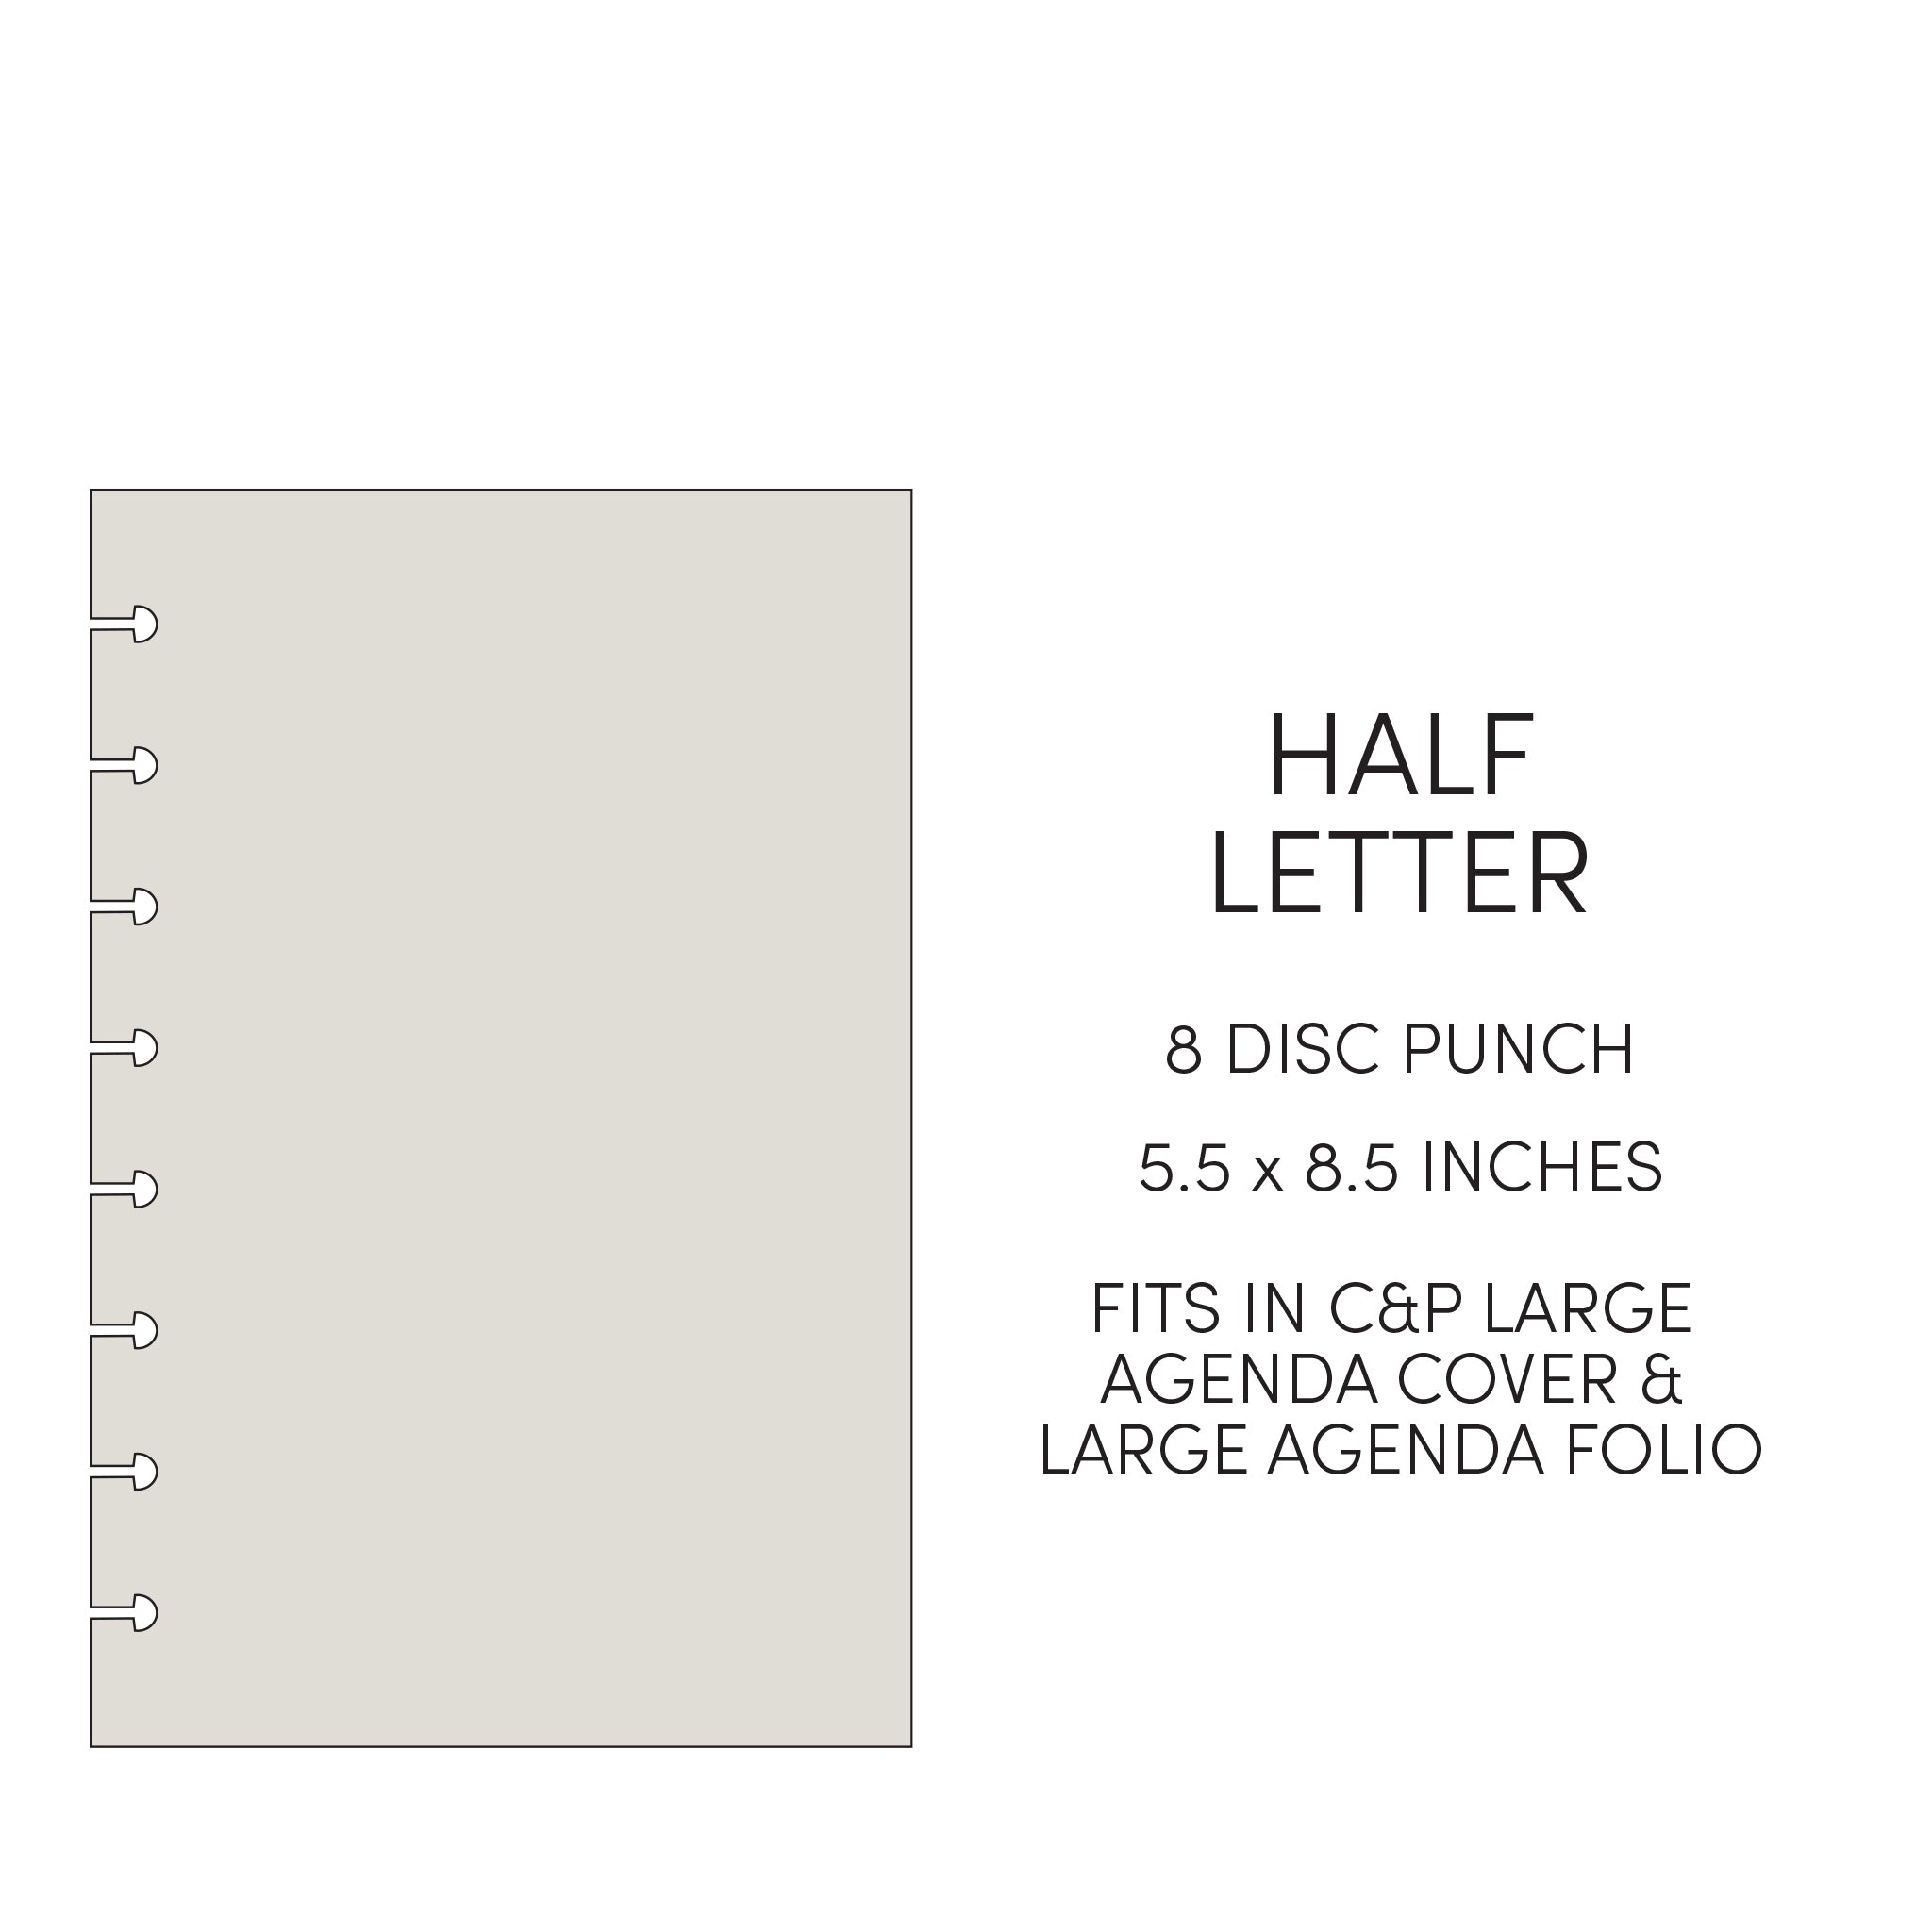 Cloth and Paper size guide - Half Letter - 5.5 x 8.5 inches